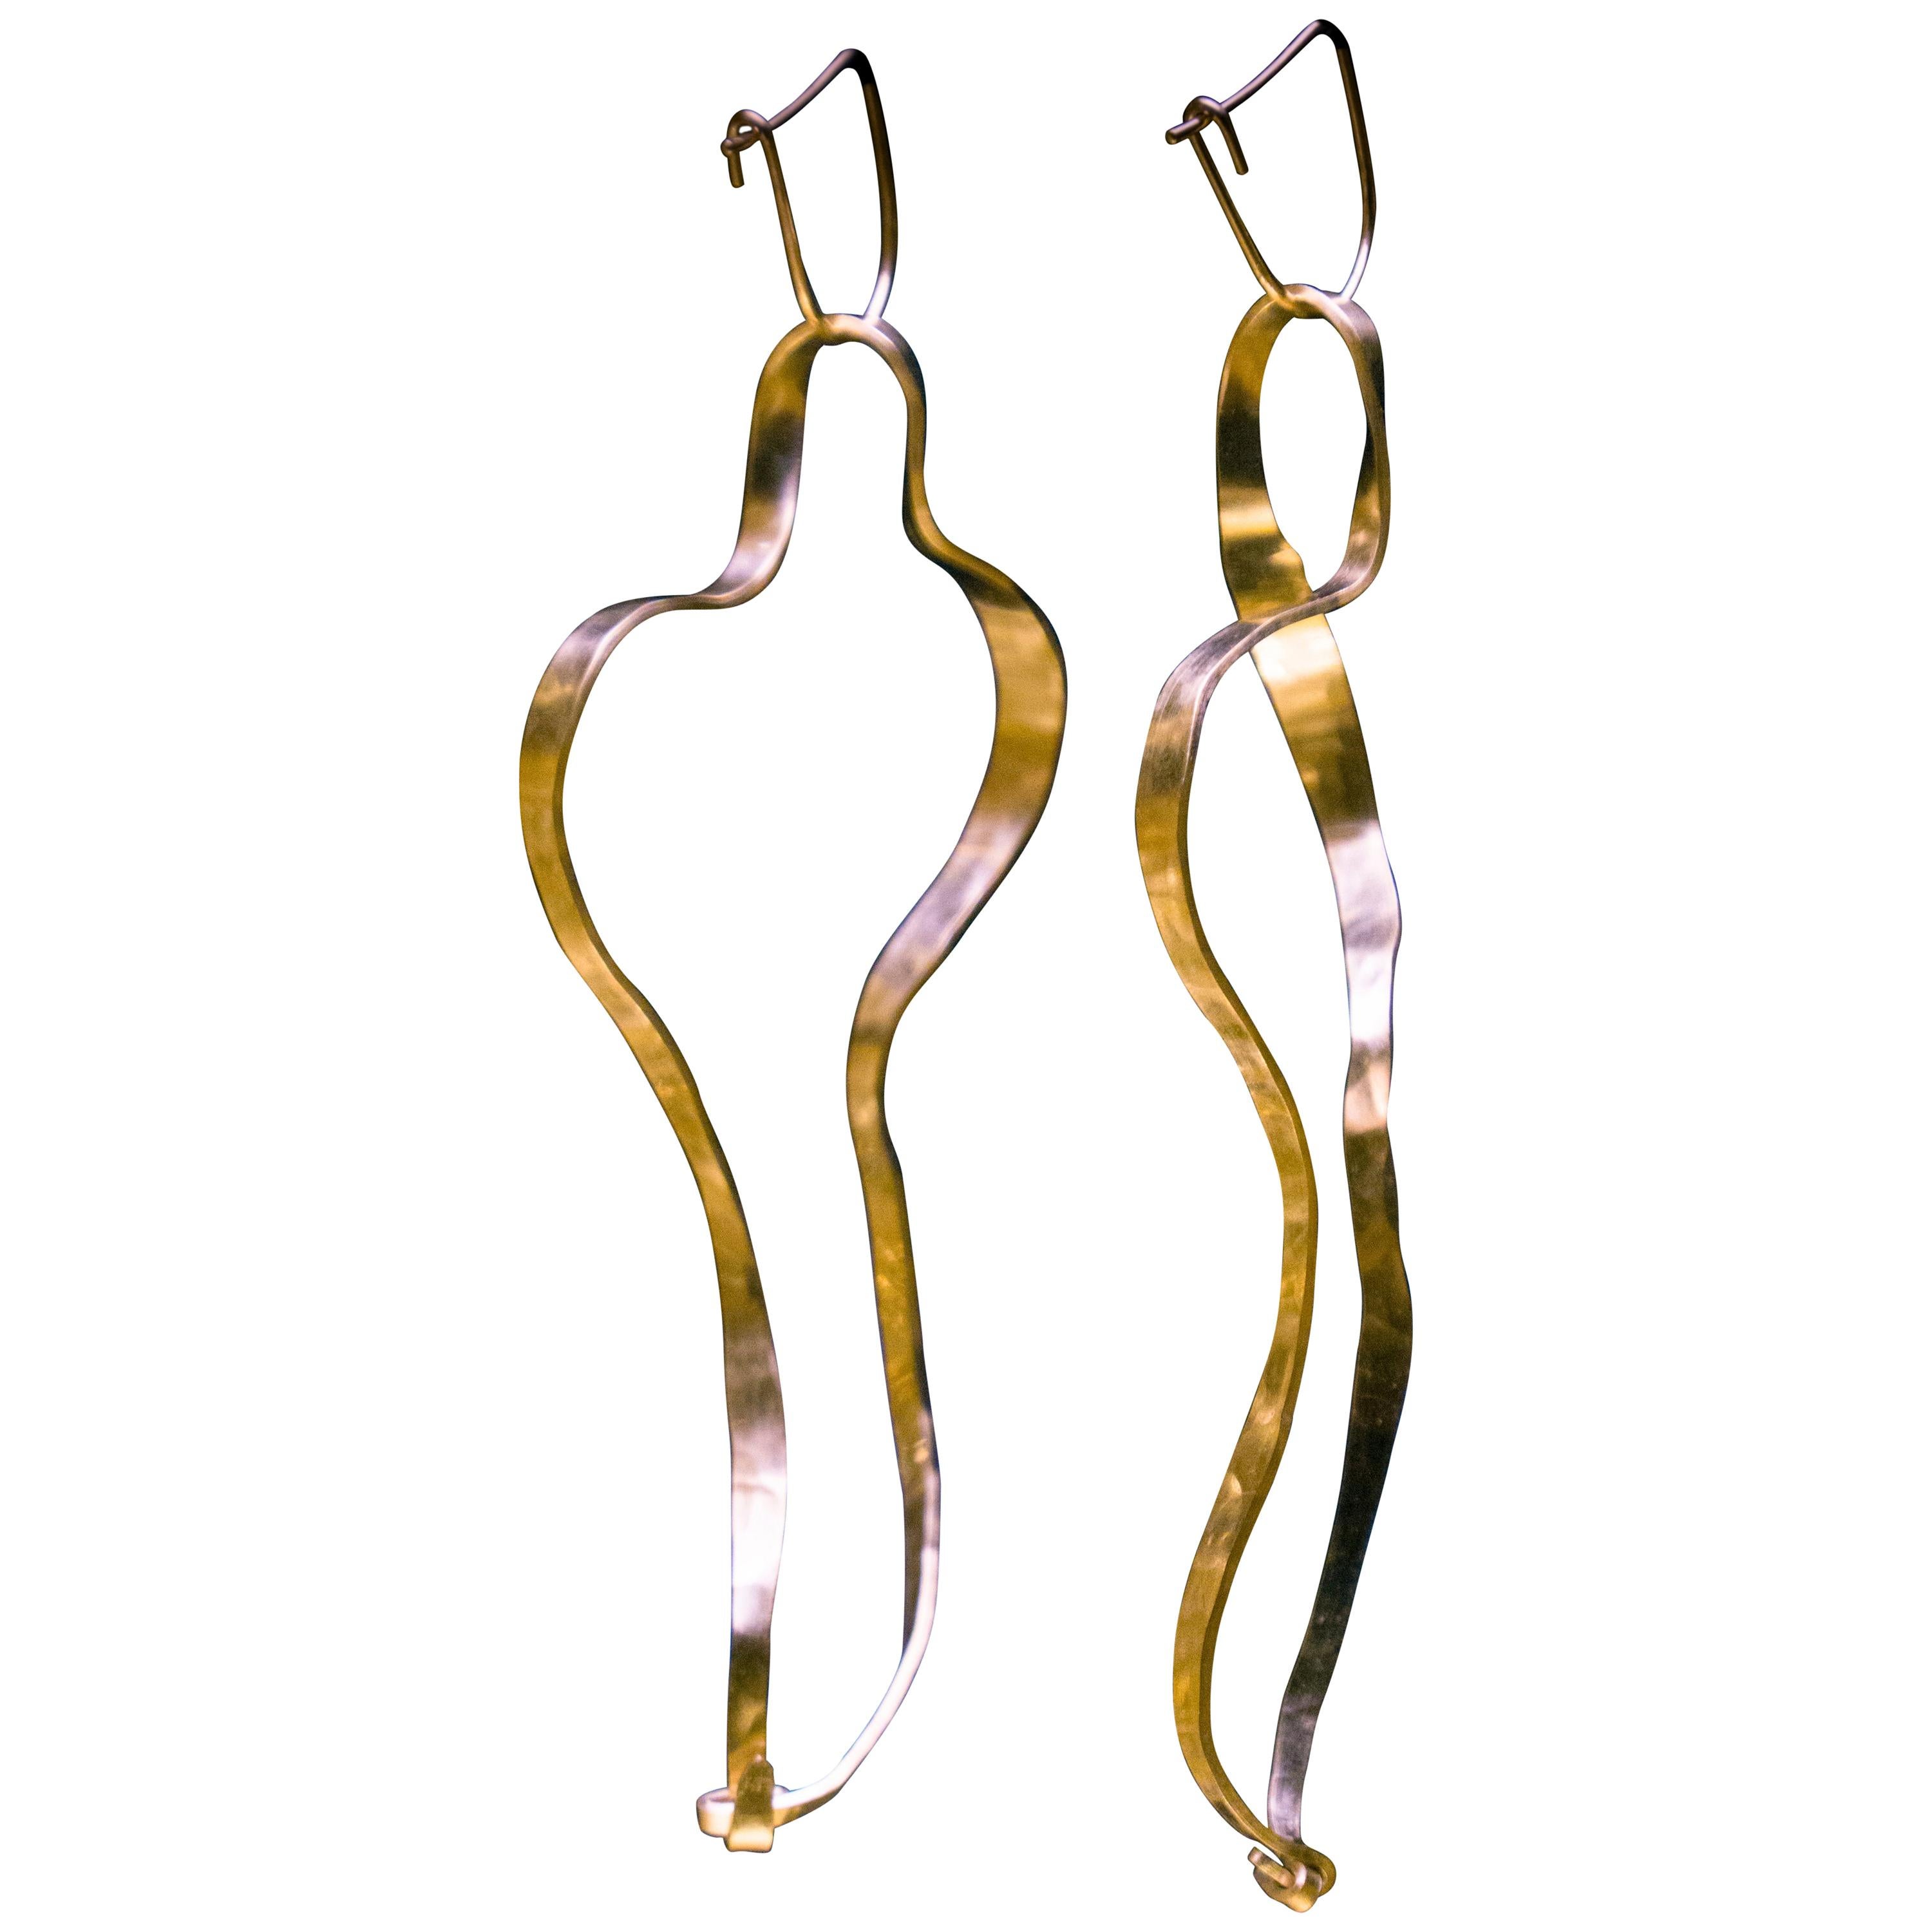 Sculpture Earrings in Gold-Plated Brass by Jacques Jarrige "Waves" For Sale